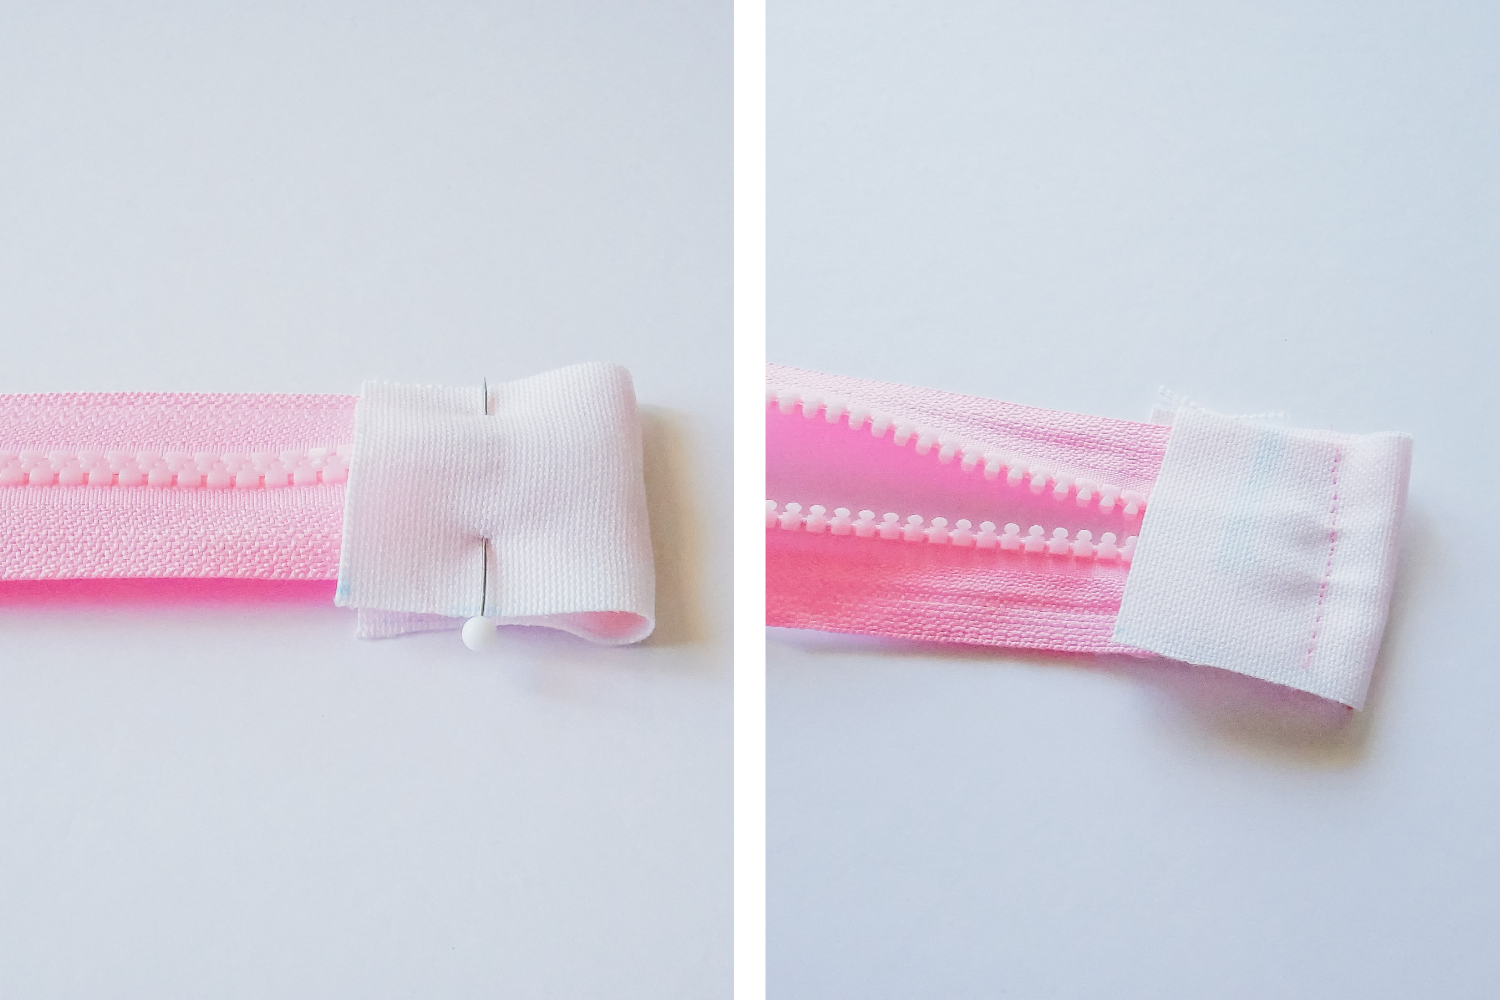 Two images have been placed side by side in one rectangle. On the left, A pink zipper is lying on a white surface. A small piece of fabric has been folded right sides together over the right edge of the zipper. A pin has been placed near the open end of the long top side of the rectangle piece of fabric. On the right, A pink zipper is lying on a white surface. A small piece of fabric has been folded right sides together over the right edge of the zipper. A seam has been sewn in pink thread to the top right of the folded piece of fabric.